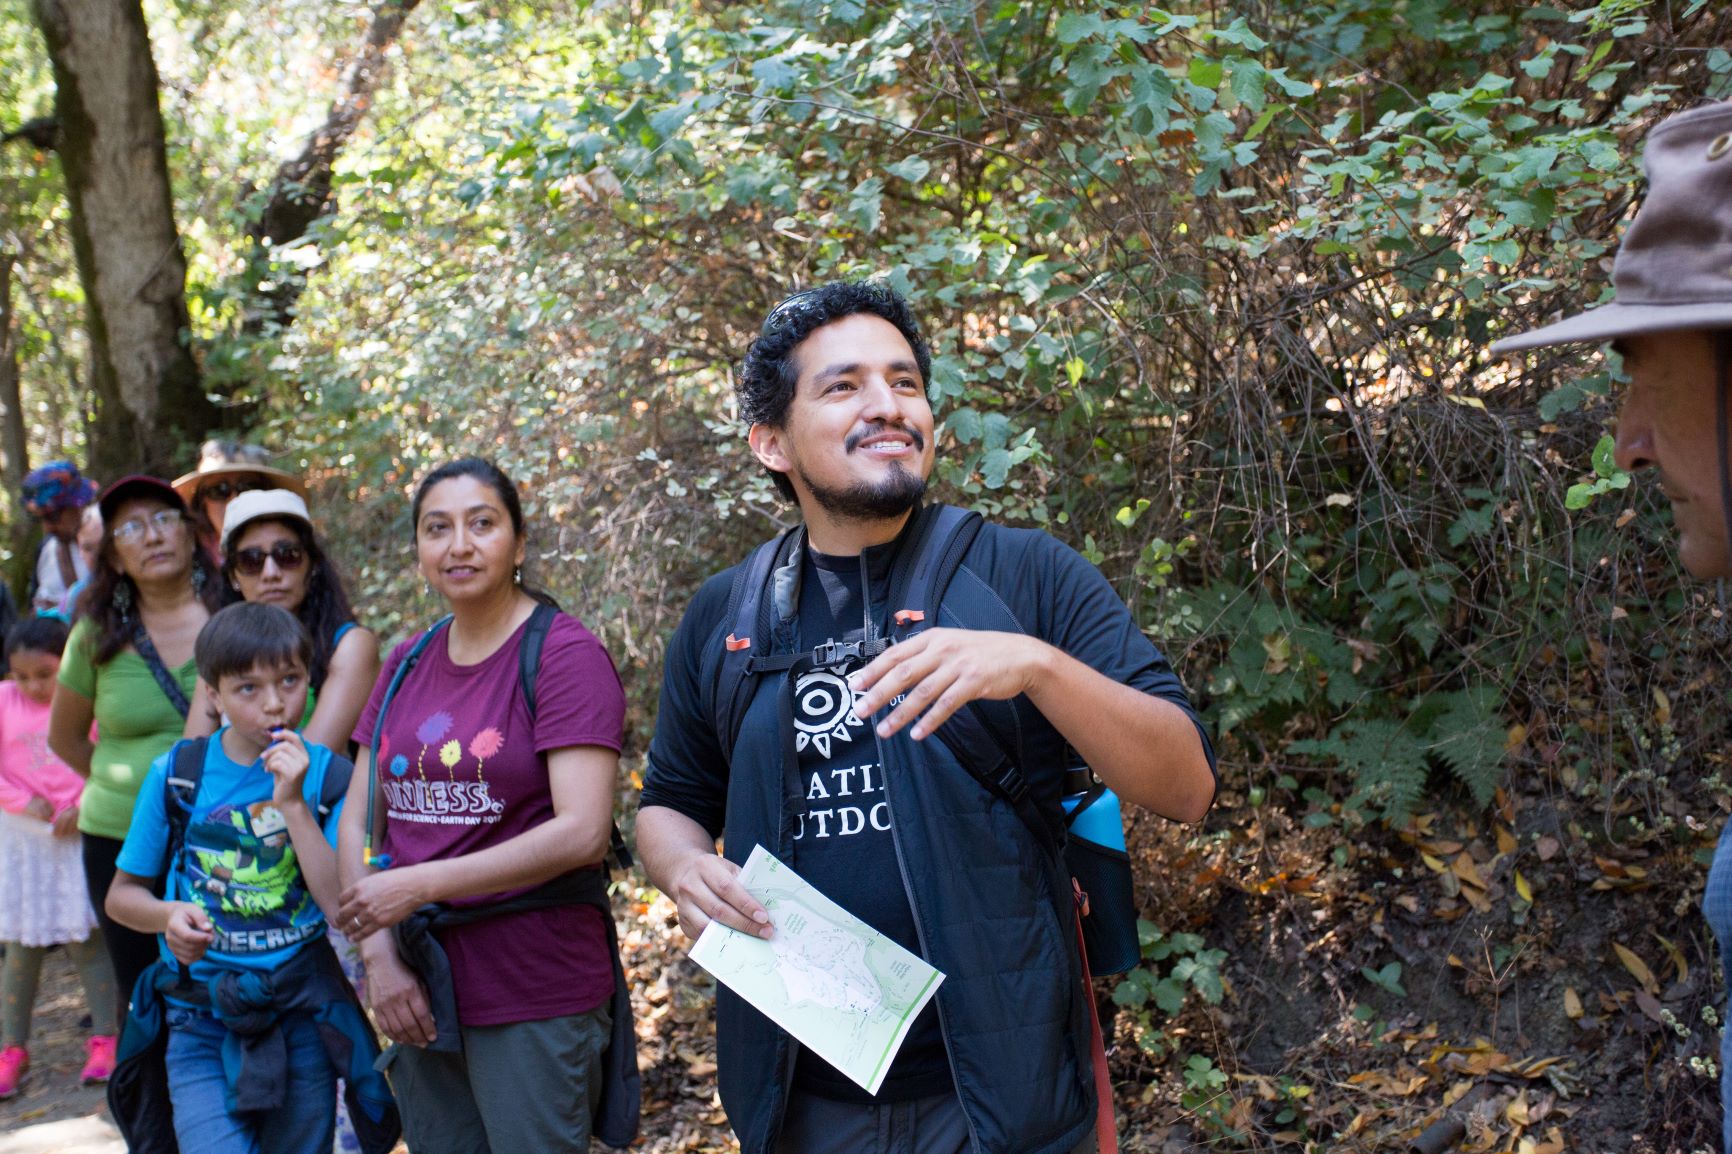 González leads a hike with the Latino Community Foundation.